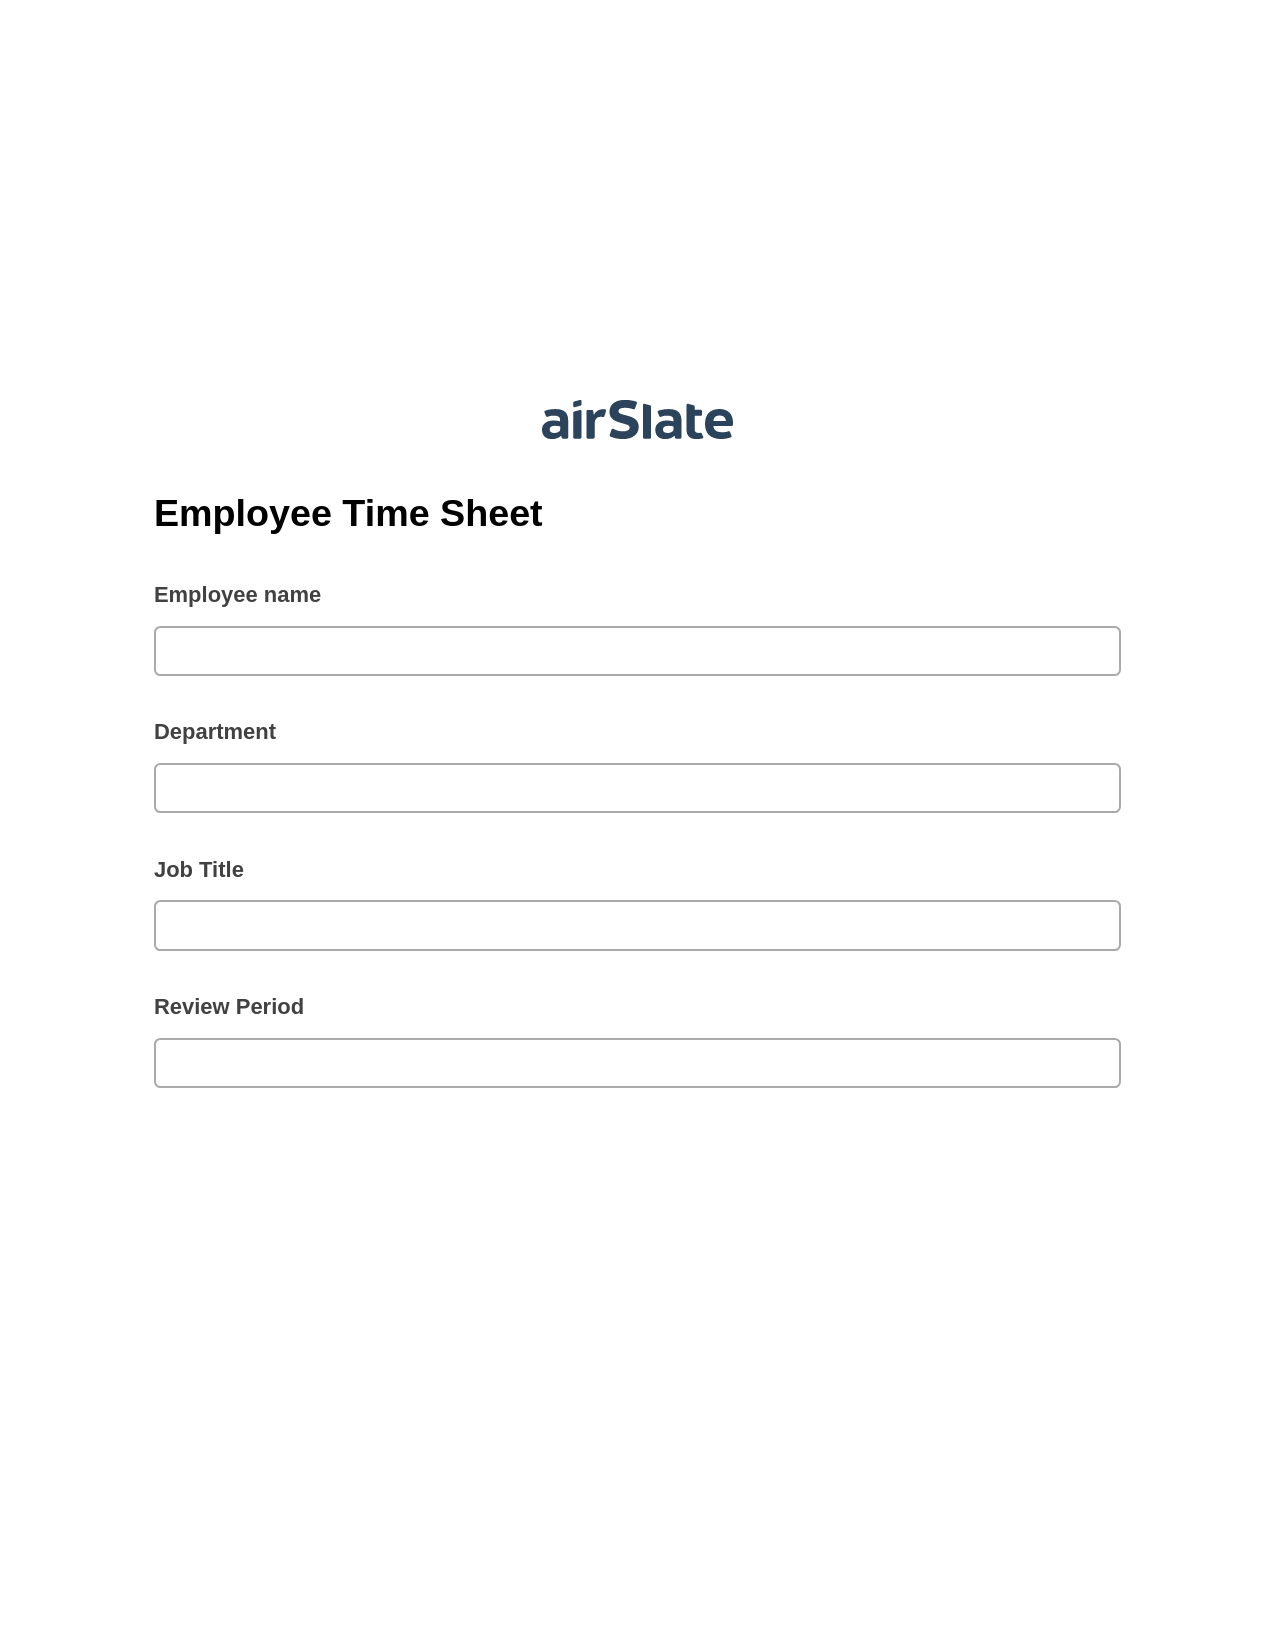 Multirole Employee Time Sheet Pre-fill from Excel Spreadsheet Bot, Create slate addon, Archive to Google Drive Bot